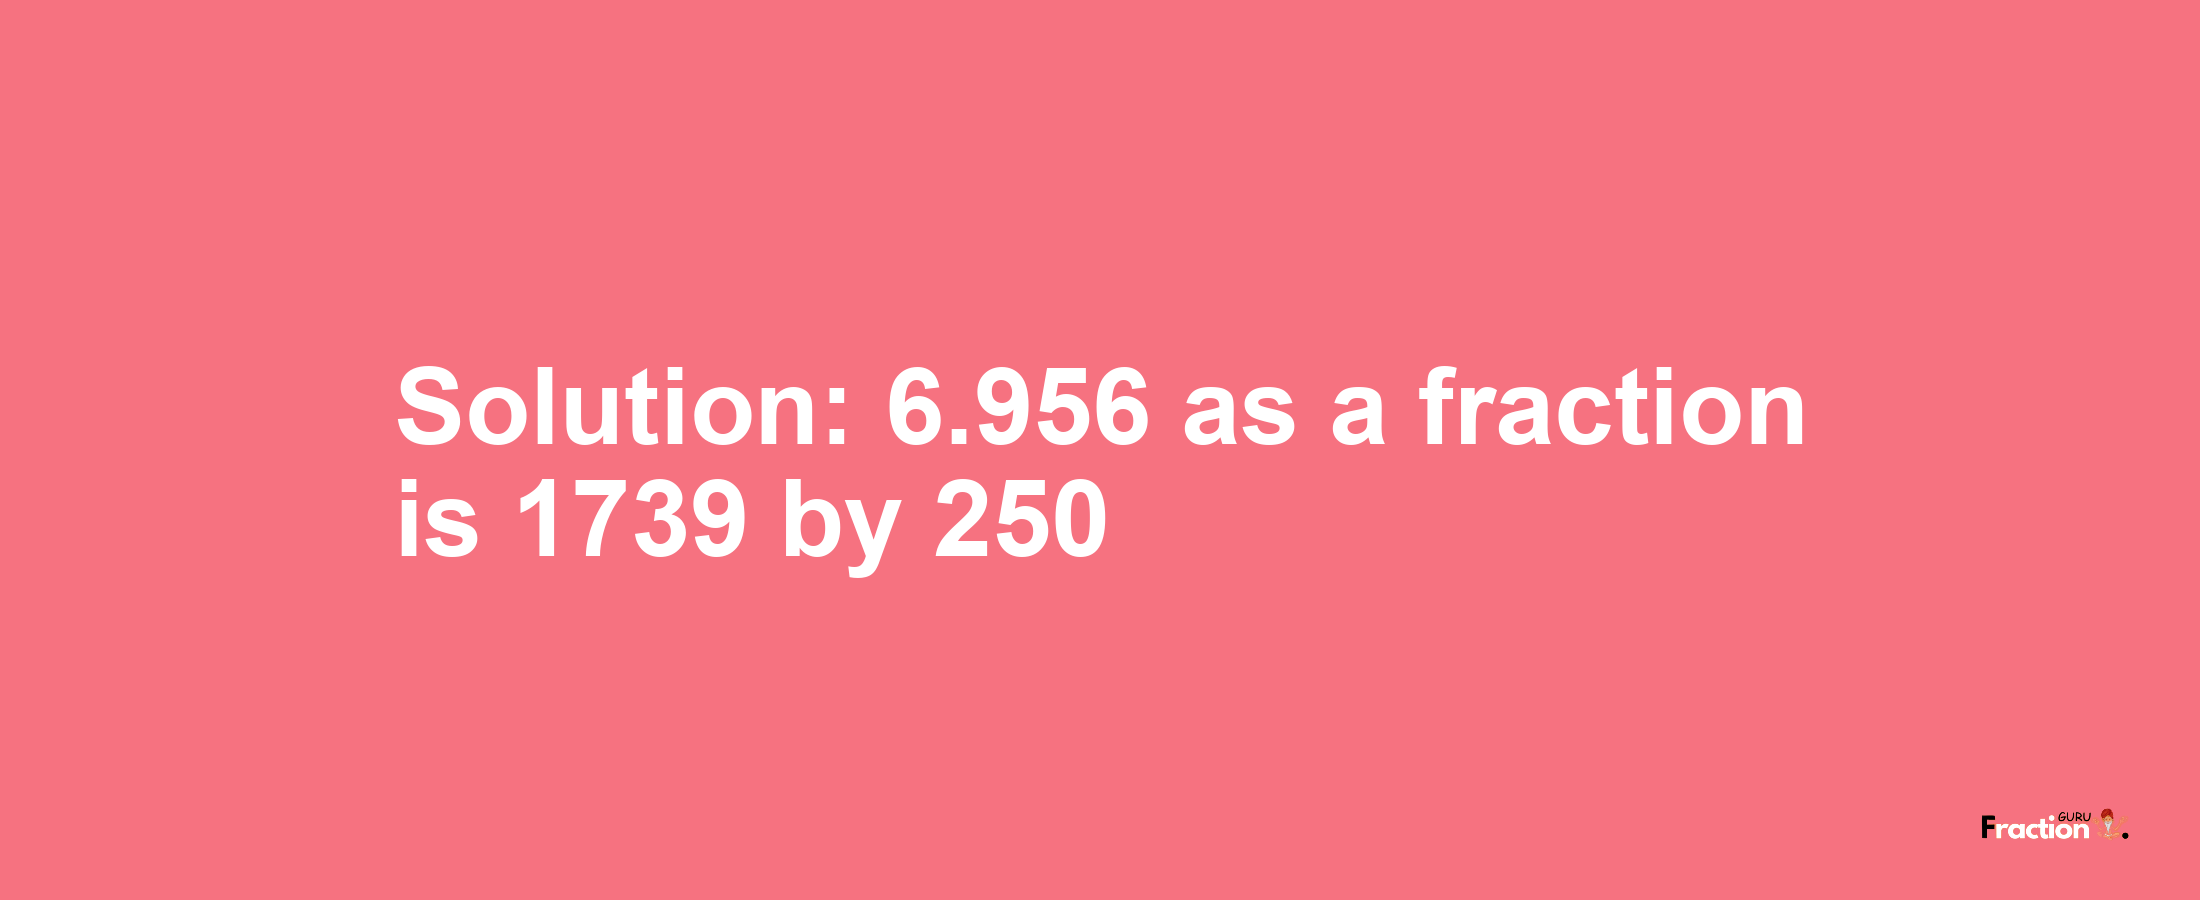 Solution:6.956 as a fraction is 1739/250